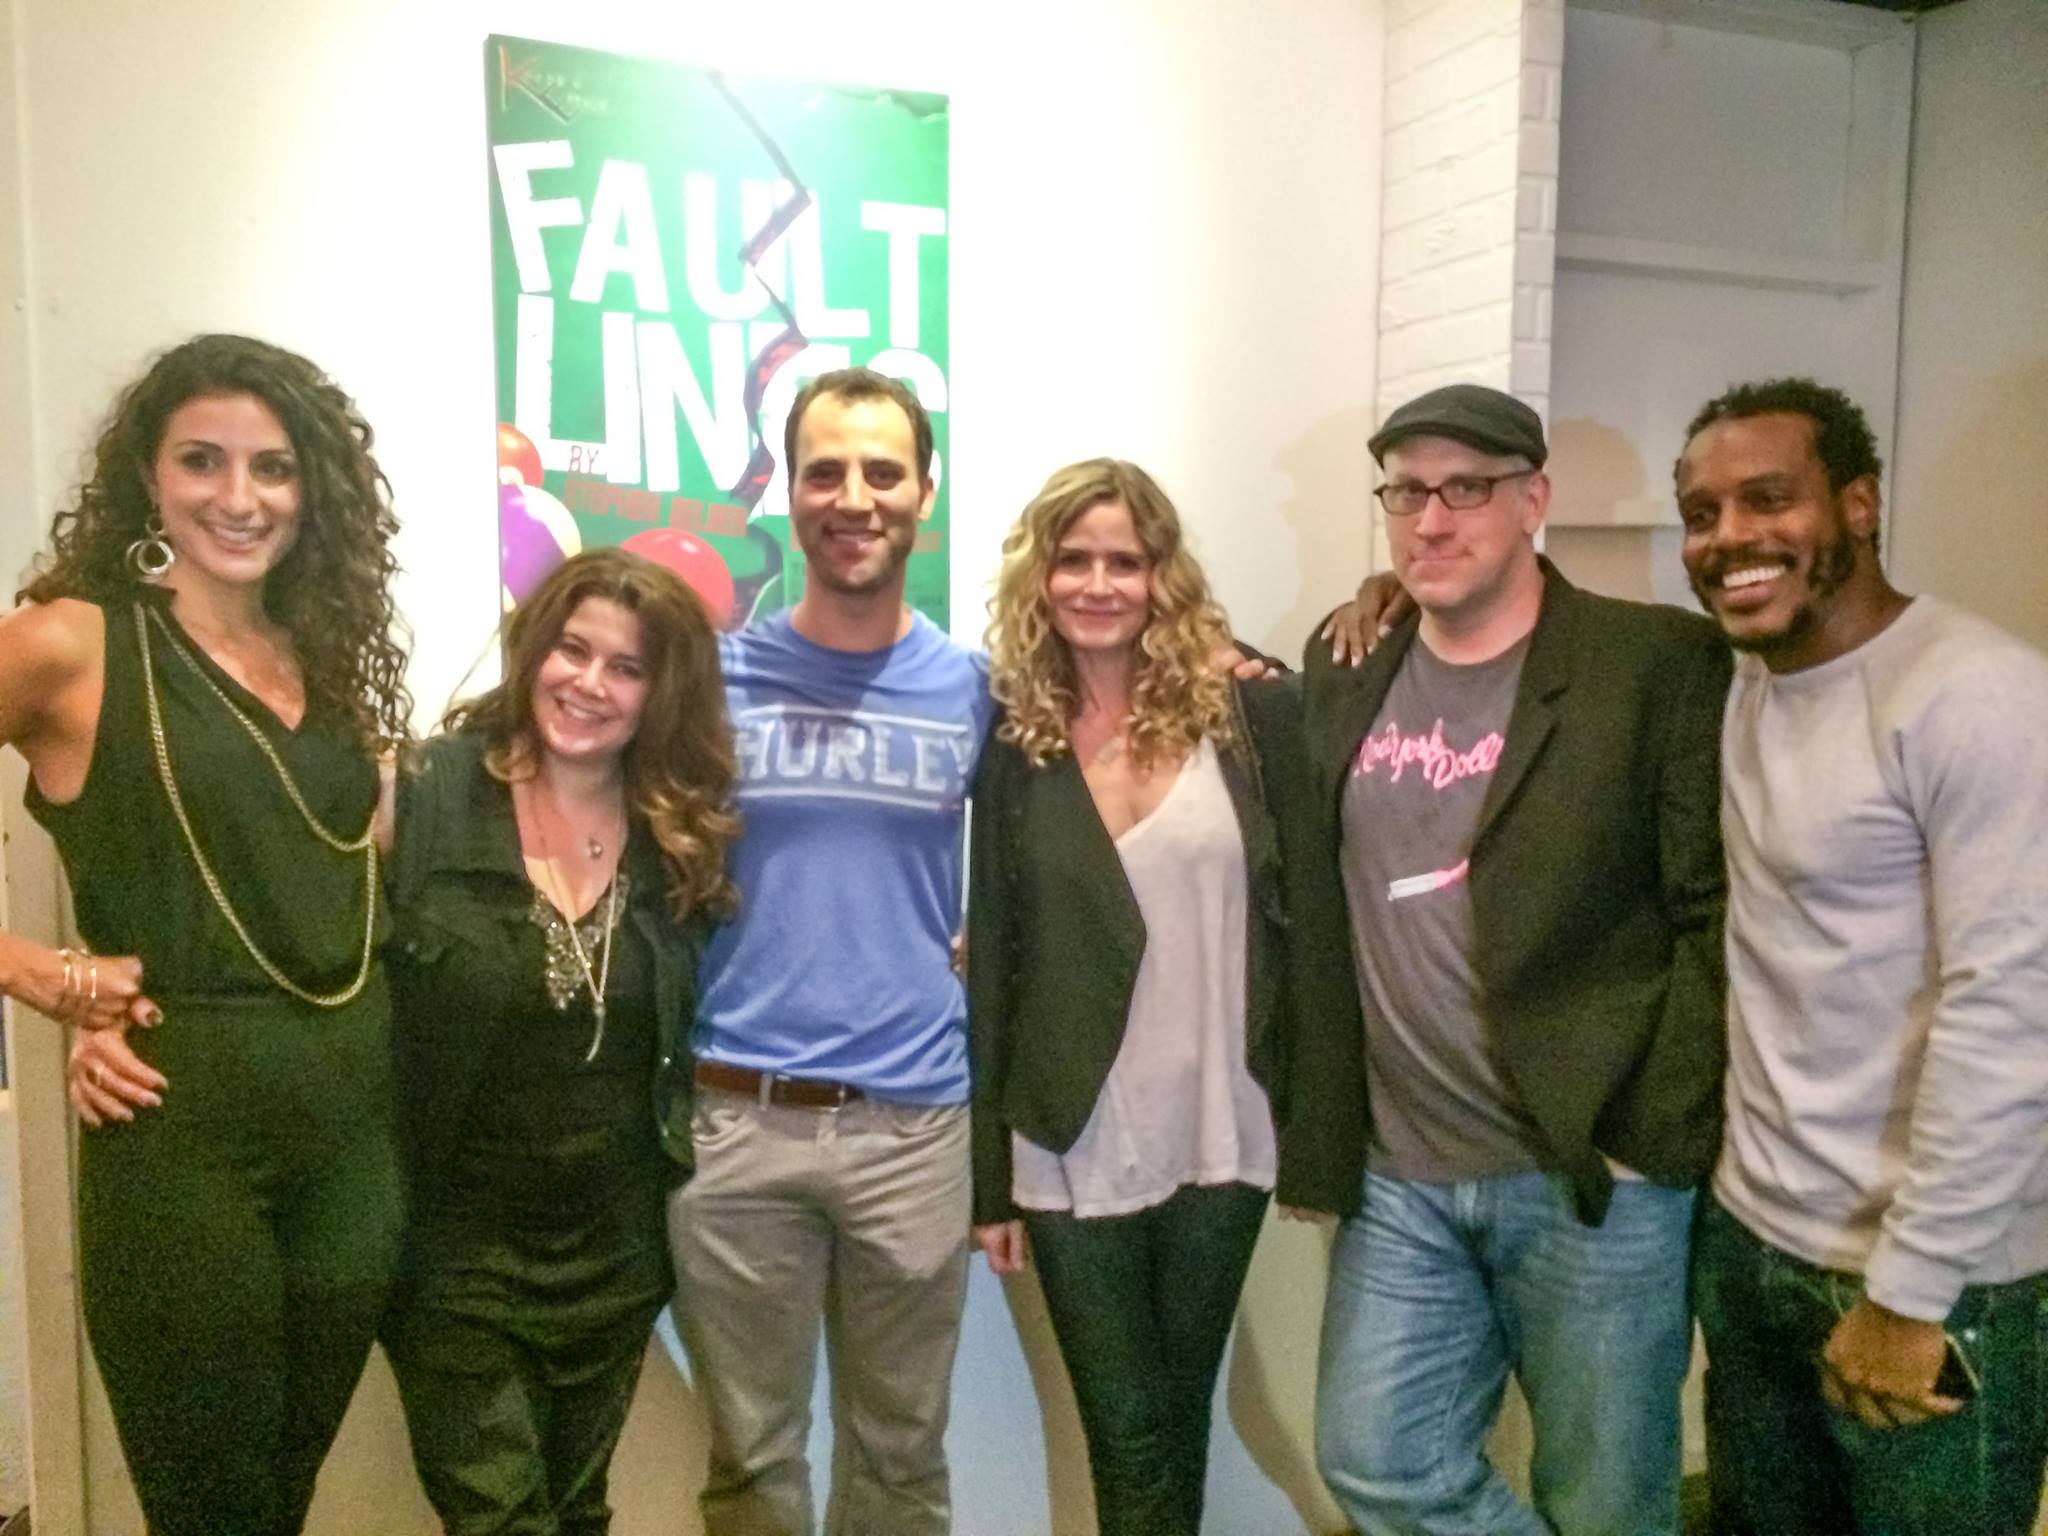 Danelle Eliav, Shira-Lee Shalit, Neil Holland, Kyra Sedgwick, Michael Puzzo and Chaz Reuben post-show at Knife Edge Productions' FAULT LINES by Stephen Belber